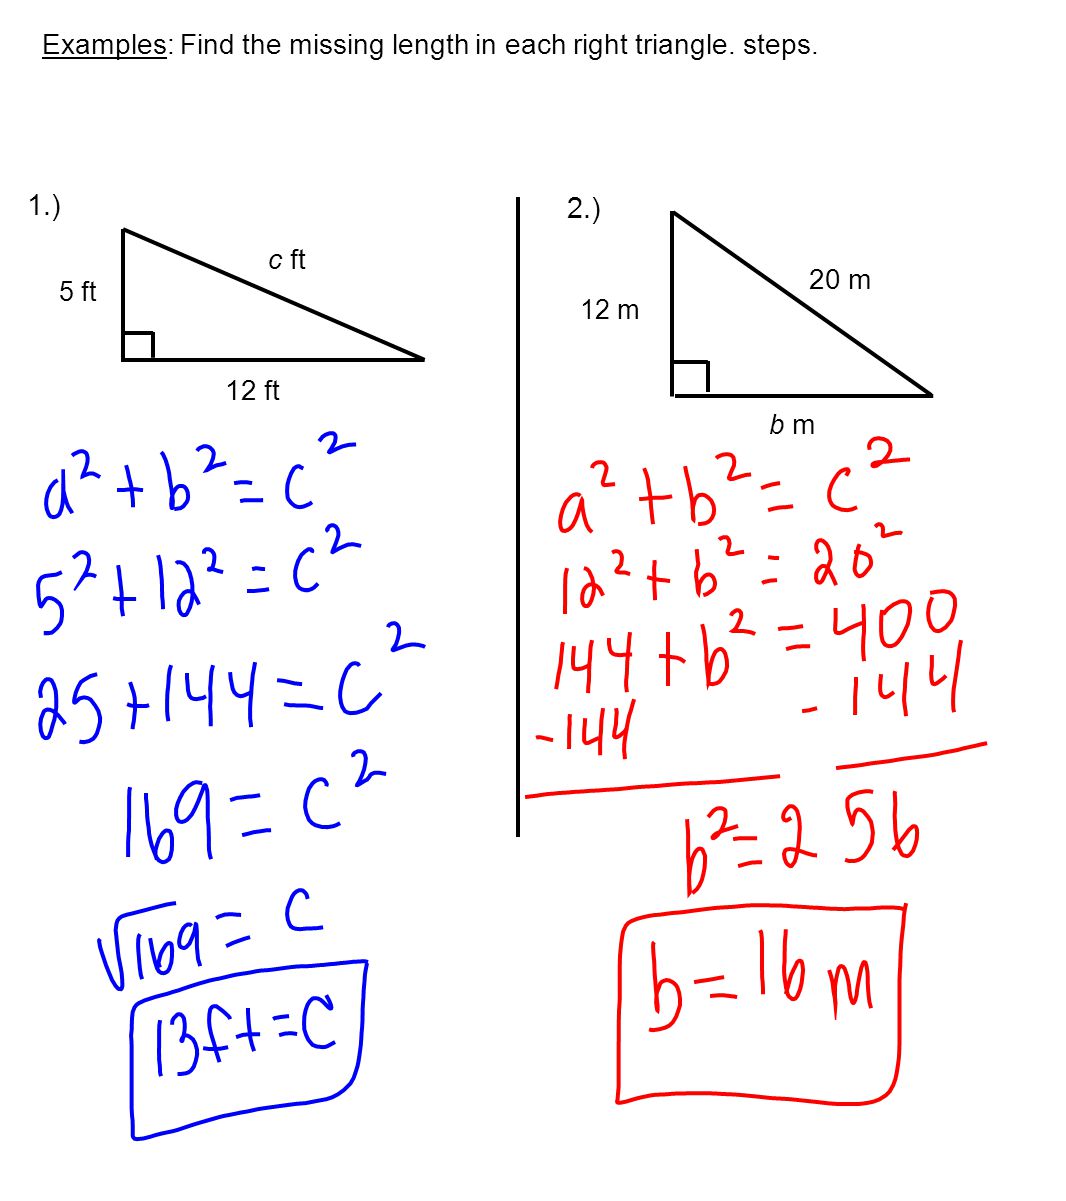 Examples: Find the missing length in each right triangle.